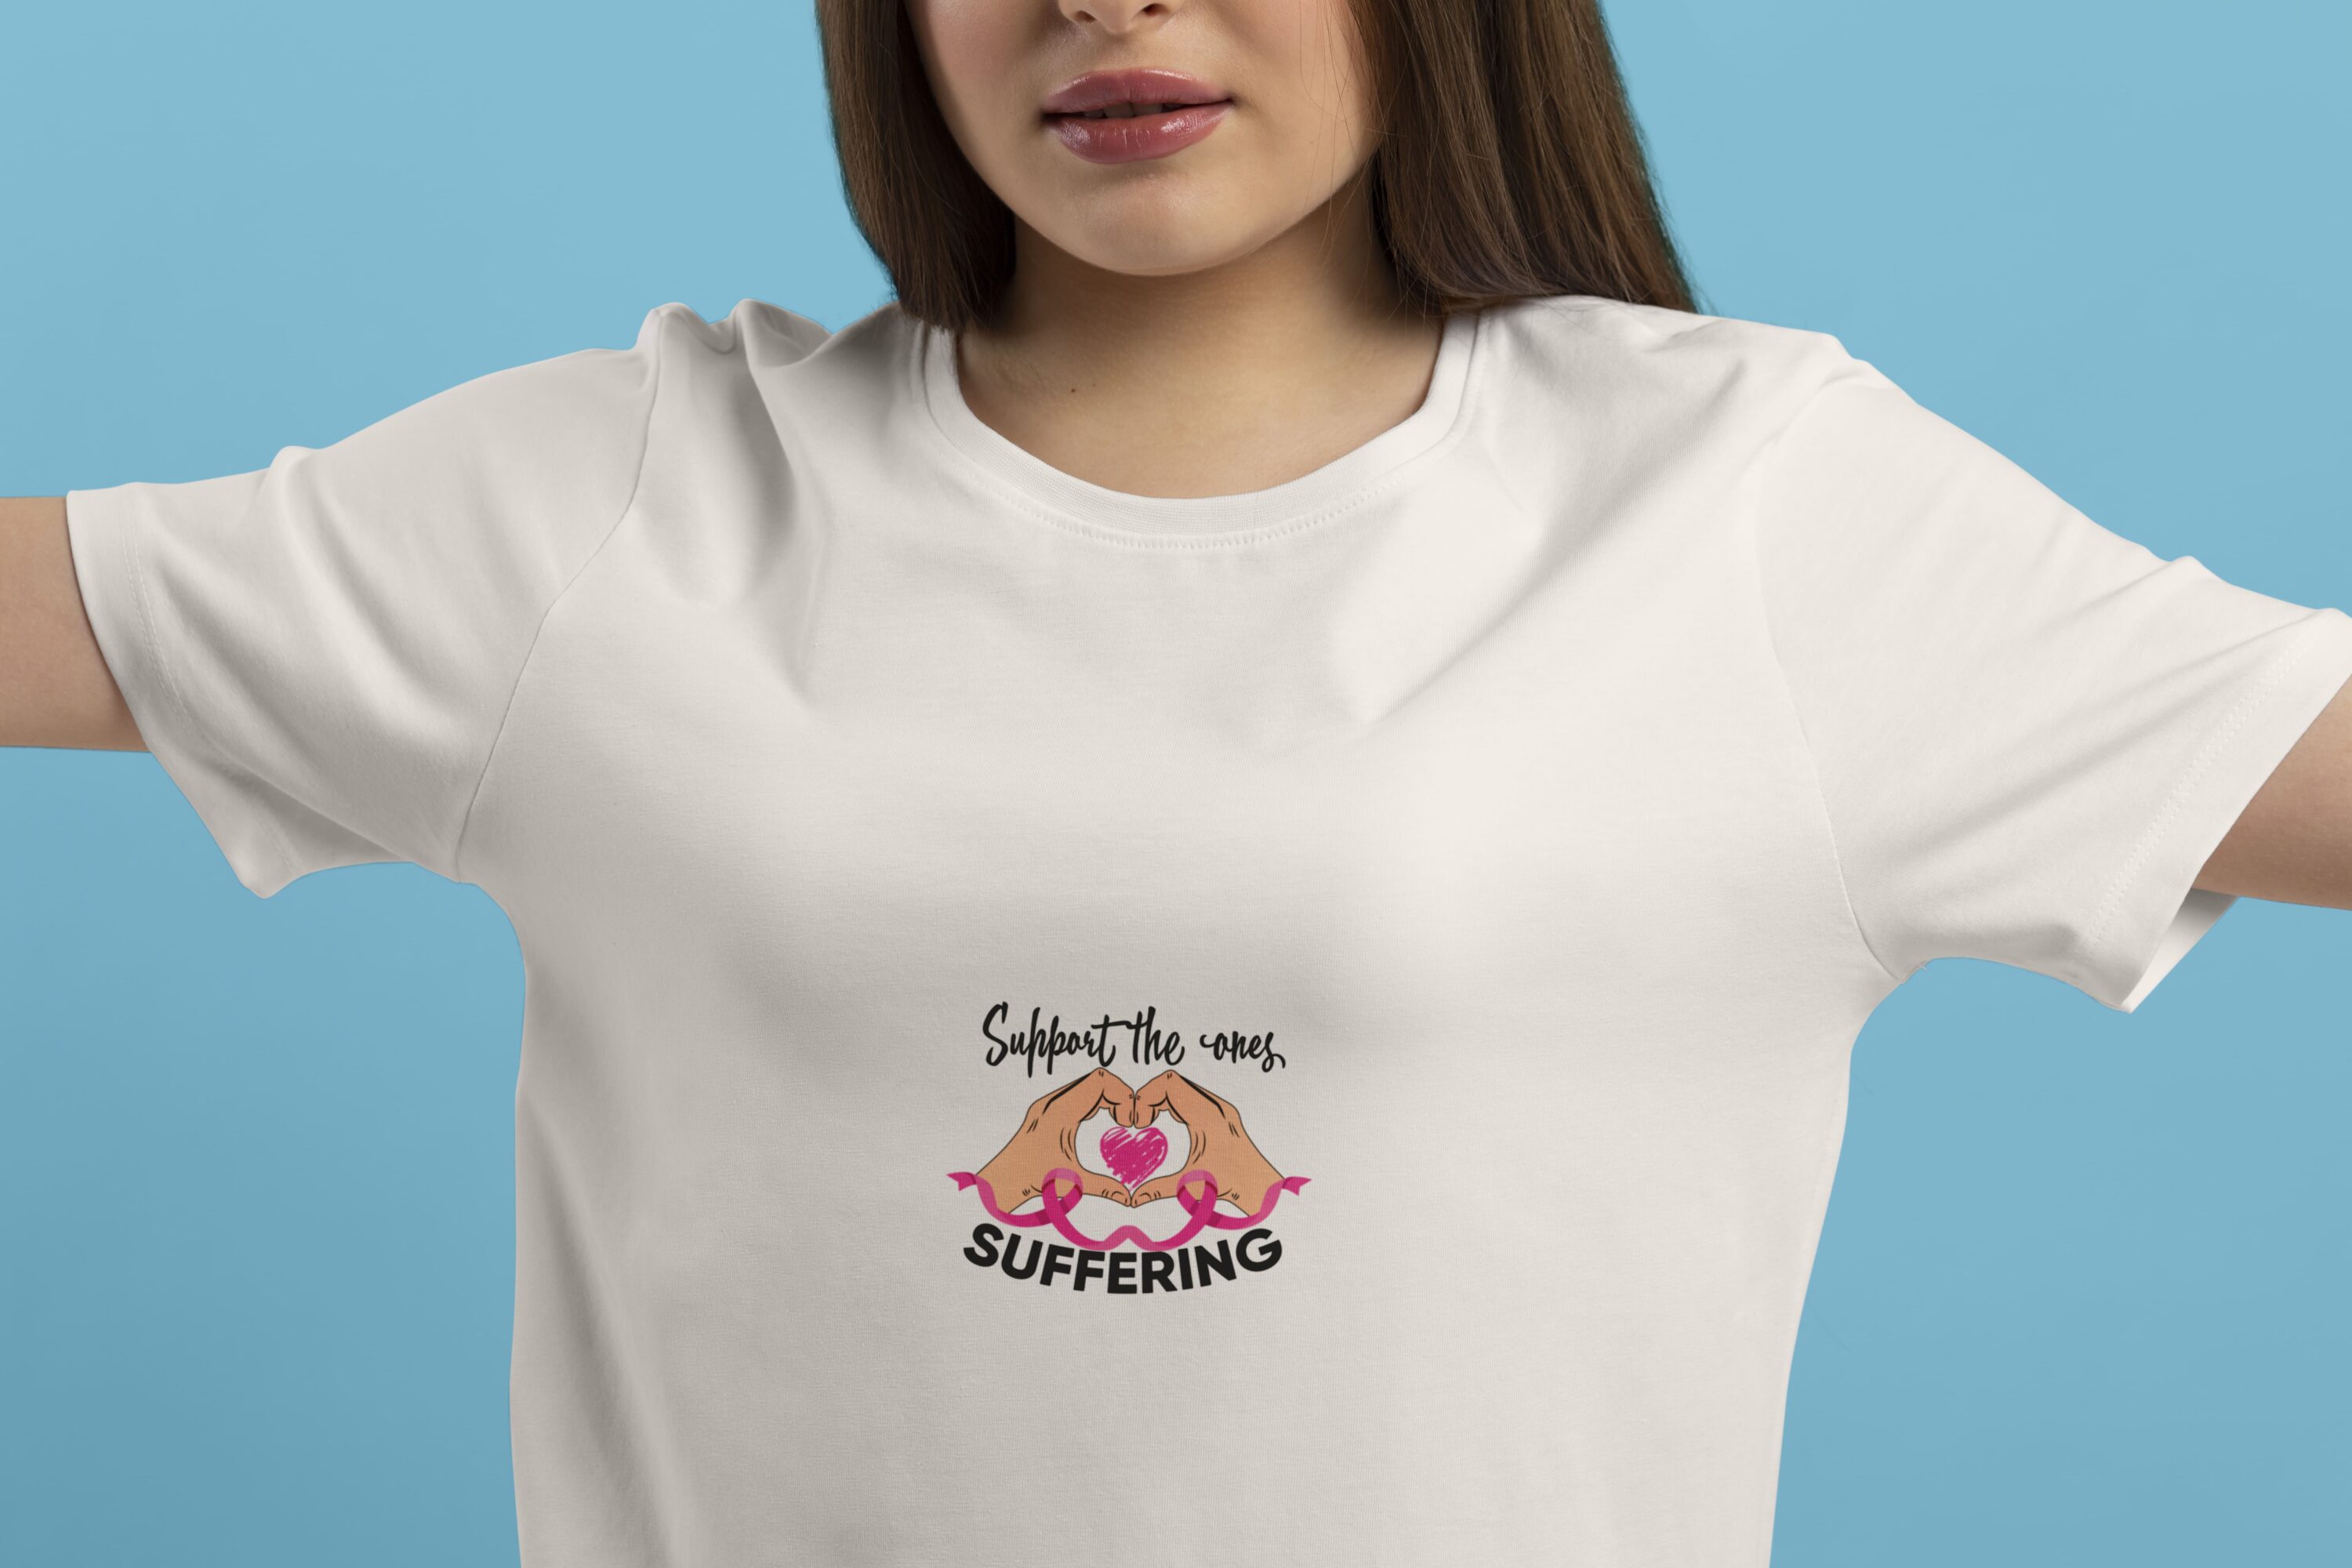 White high quality t-shirt with the colorful small cancer graphic.